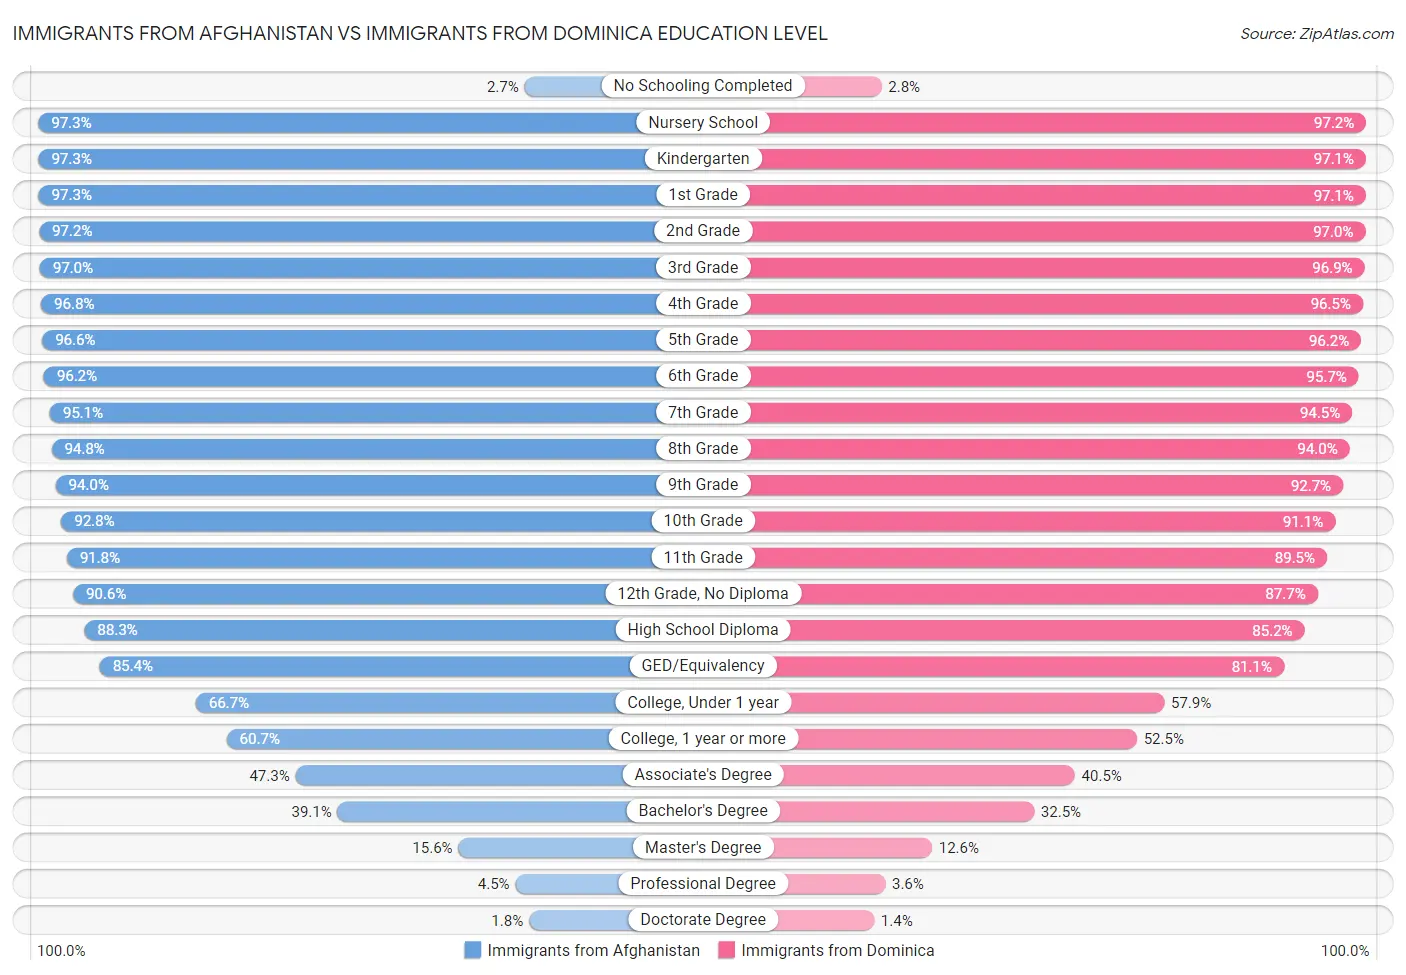 Immigrants from Afghanistan vs Immigrants from Dominica Education Level